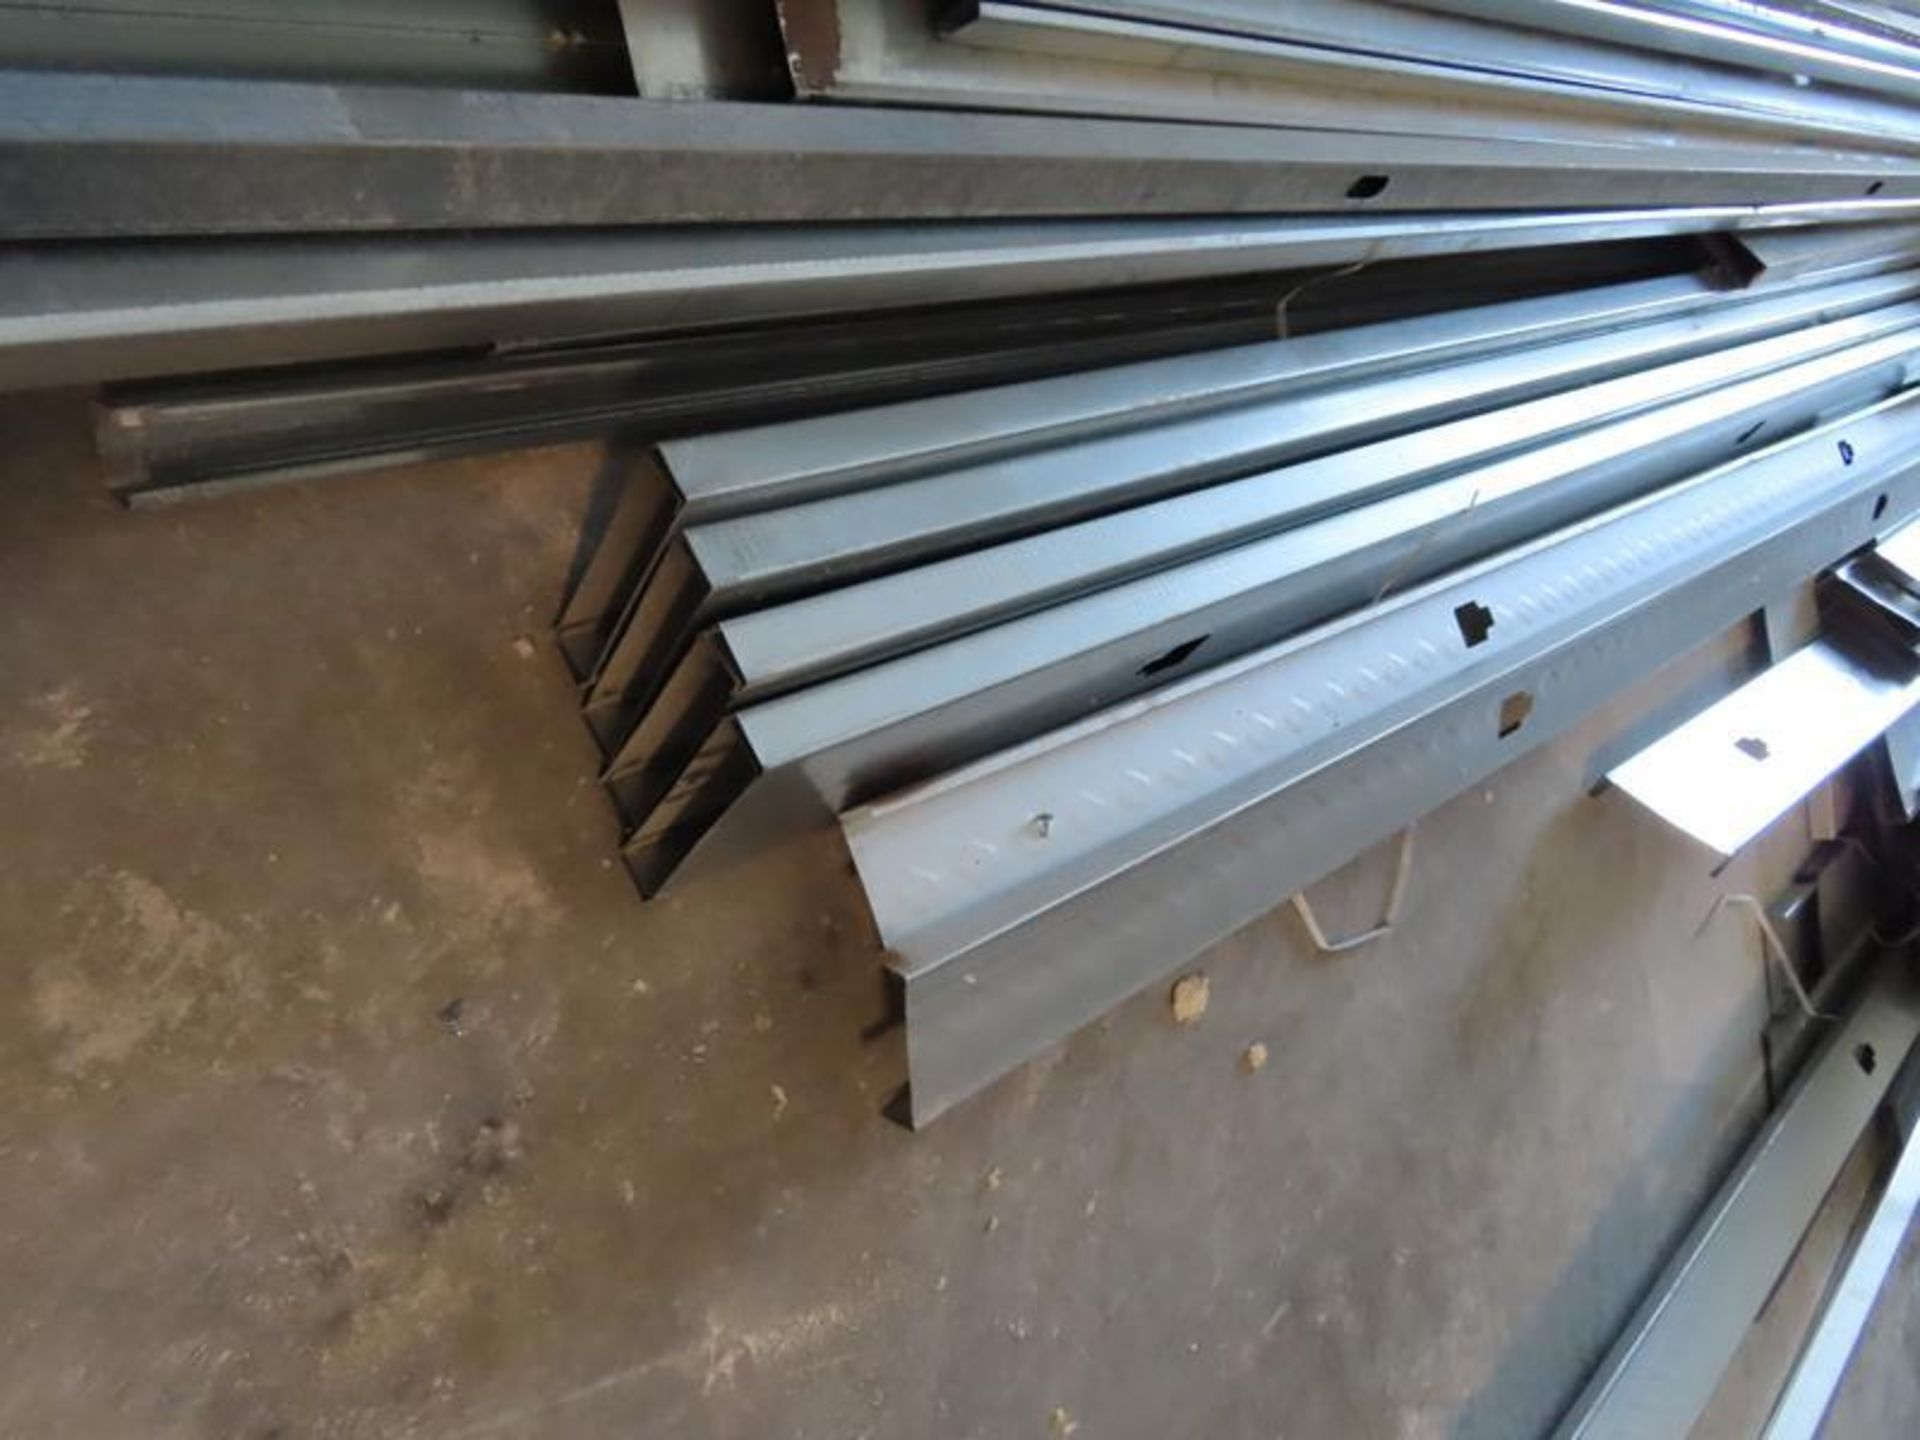 3 LARGE STACKS OF STEEL STUDS, PROSTUD 20Ga 6" 1-1/4" G40 NS (ALL UPSTAIRS) - Image 10 of 10